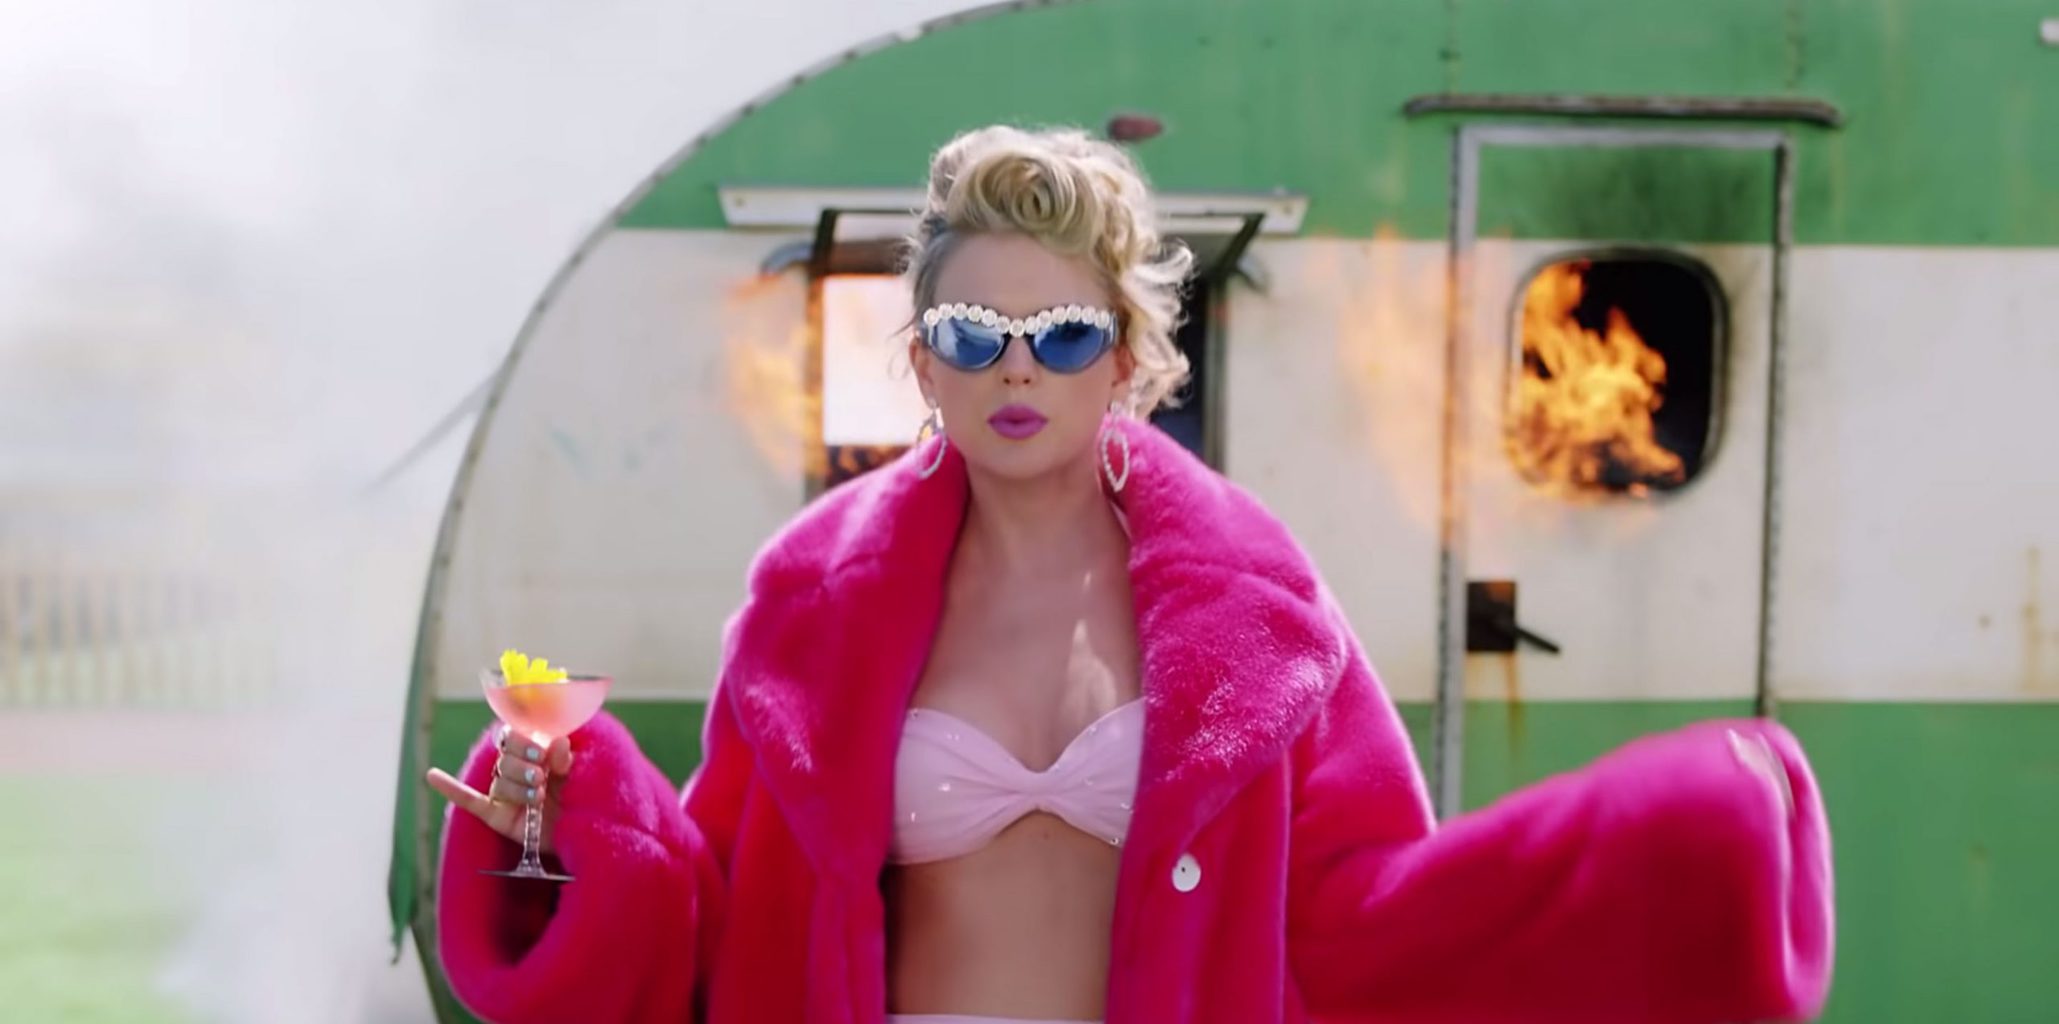 Taylor Swift in a bright pink fur jacket on the You Need To Calm Down music video set